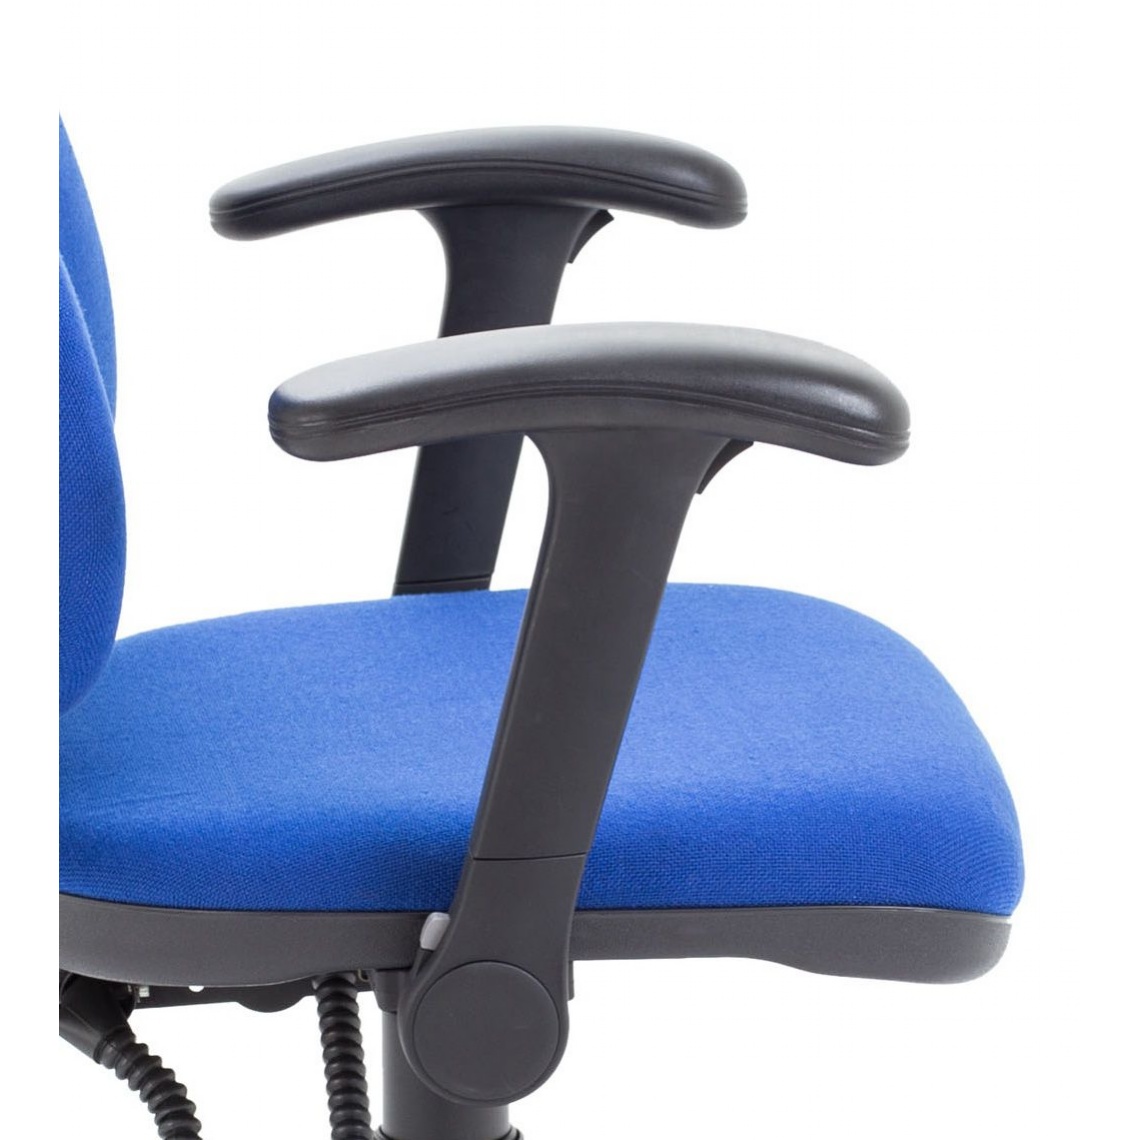 Maxi Ergo Deluxe Operators Chair with Asynchro and more! 152kgs cap